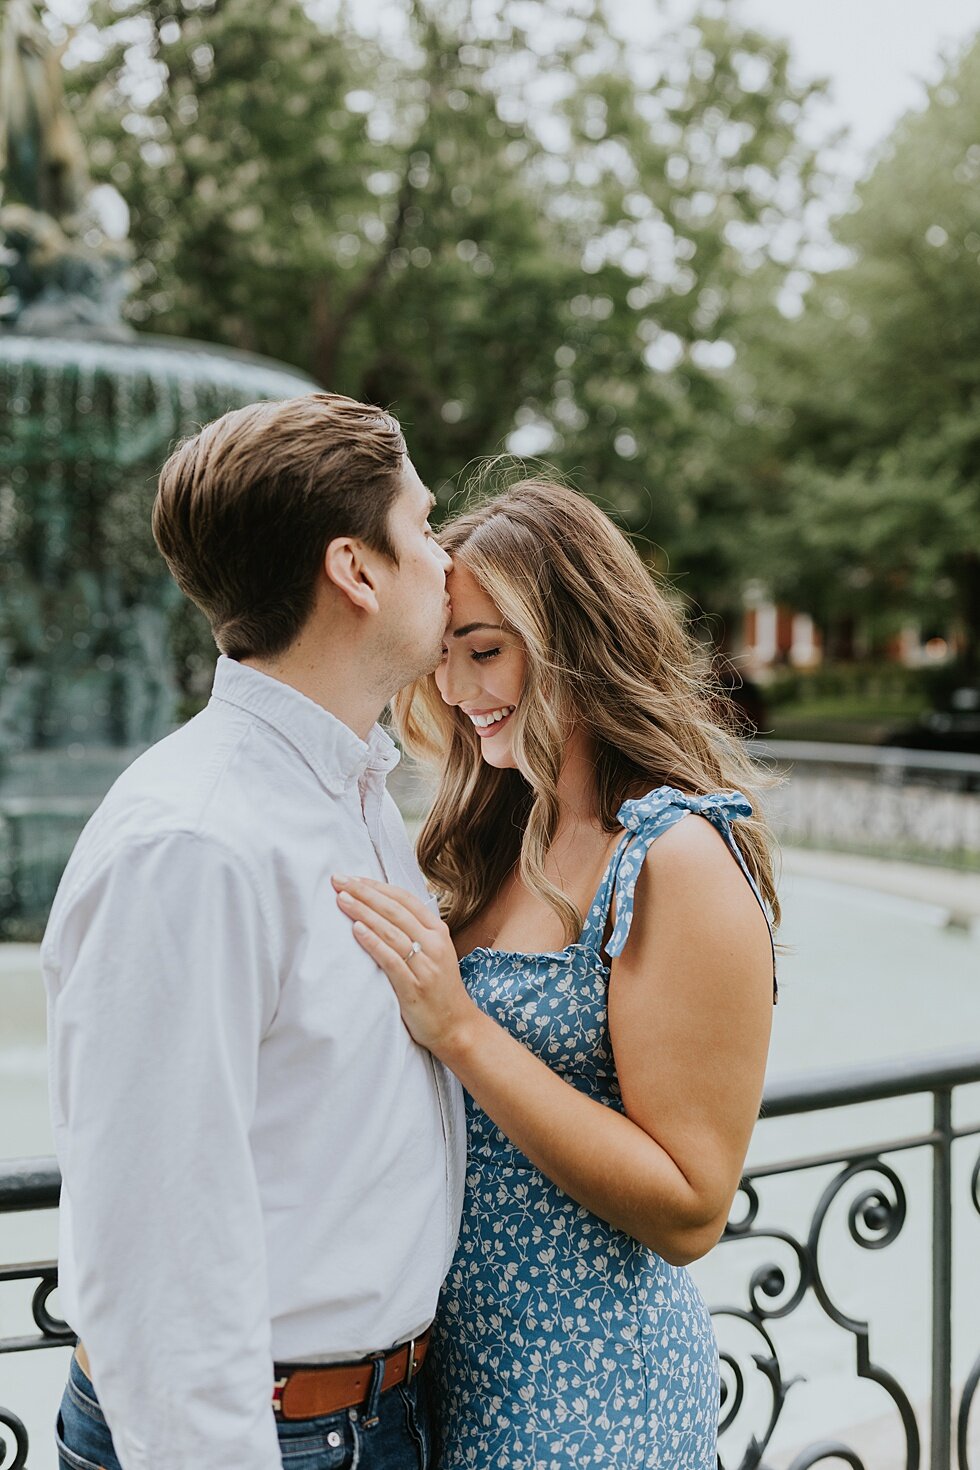  Sweet kiss on the forehead as this engaged couple shared their engagement shoot in front of the beautiful St James Court water fountains. #engagementphotos #savethedatephotos #savethedates #engagementphotography  #StJamesCourt #gardenengagment   #ce